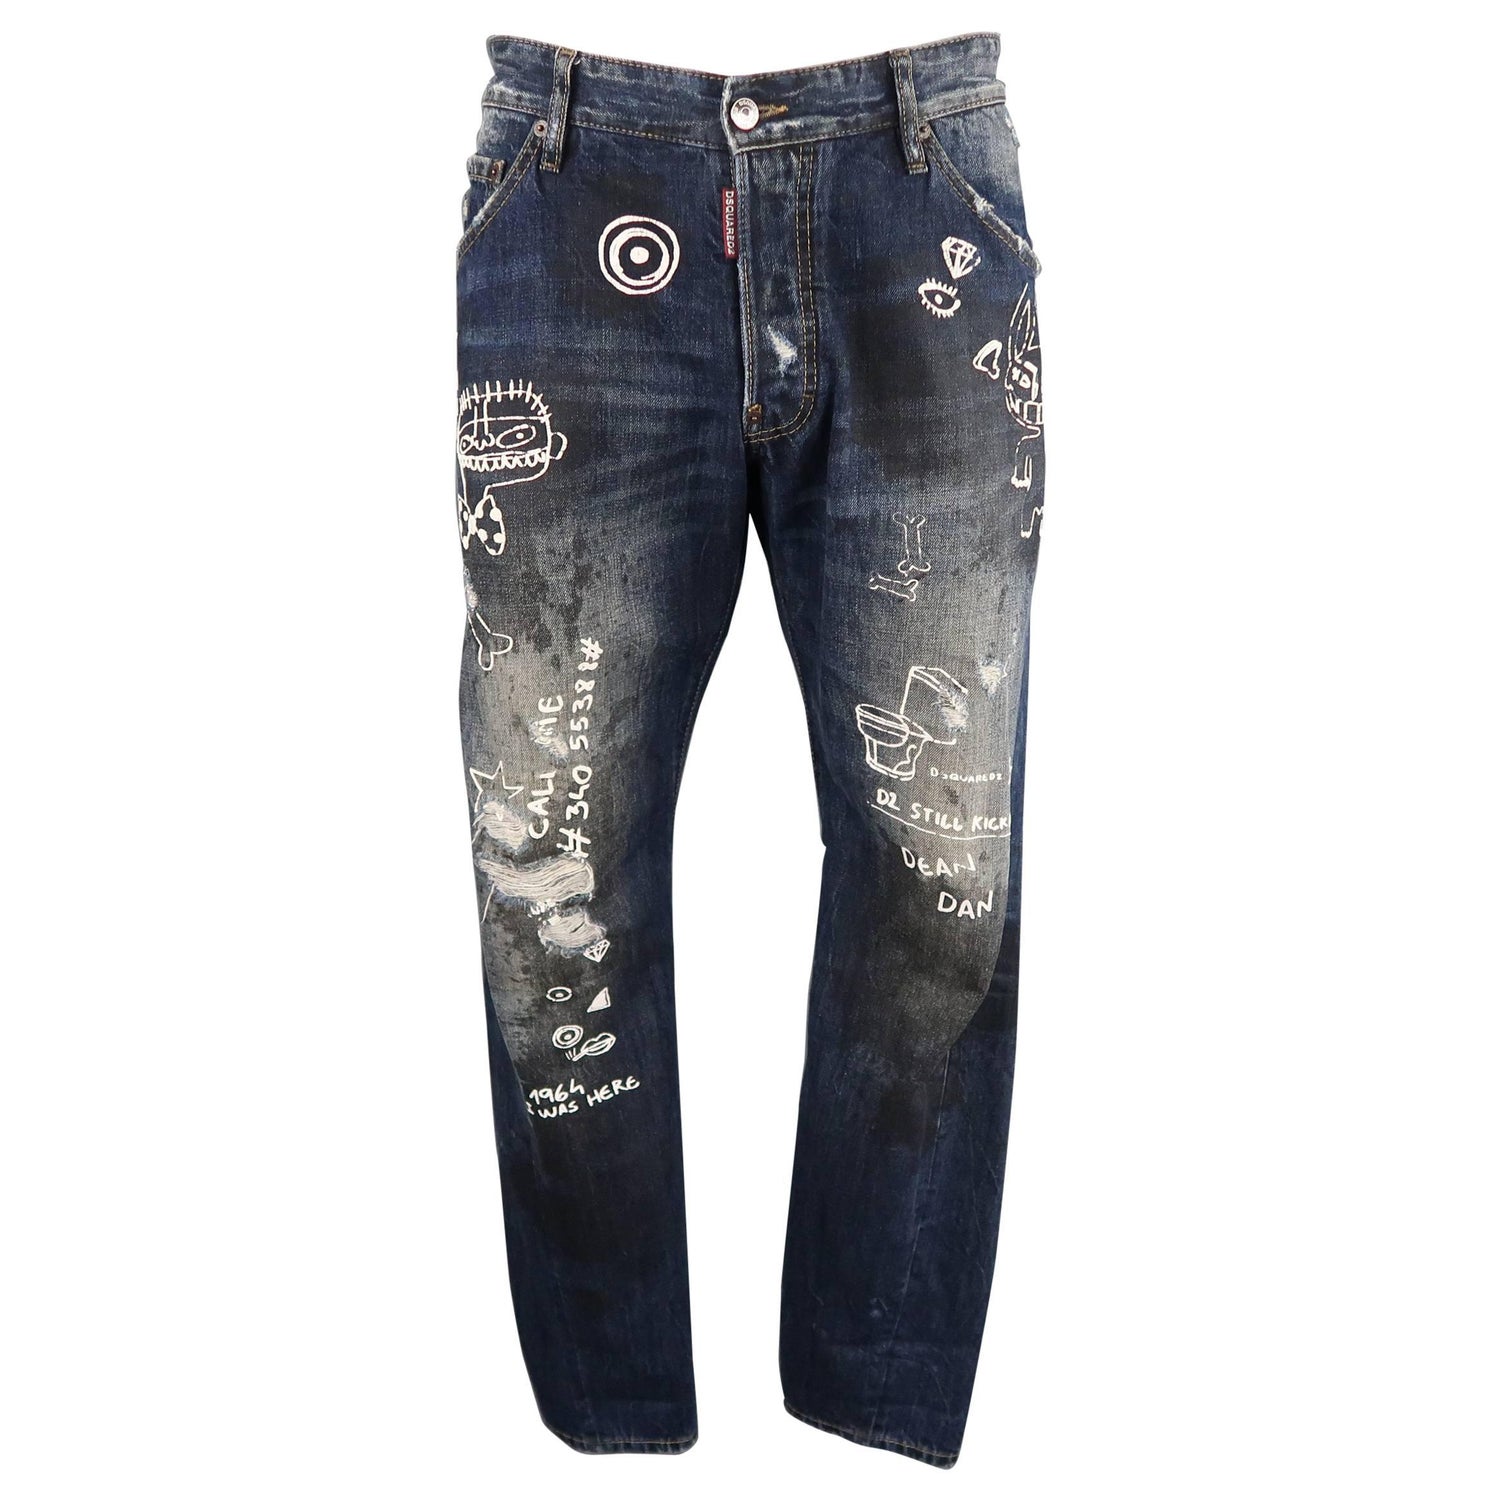 Dirty Jeans - For Sale on 1stDibs | dirty wash jeans, dirty denim jeans,  dirty wash denim jeans